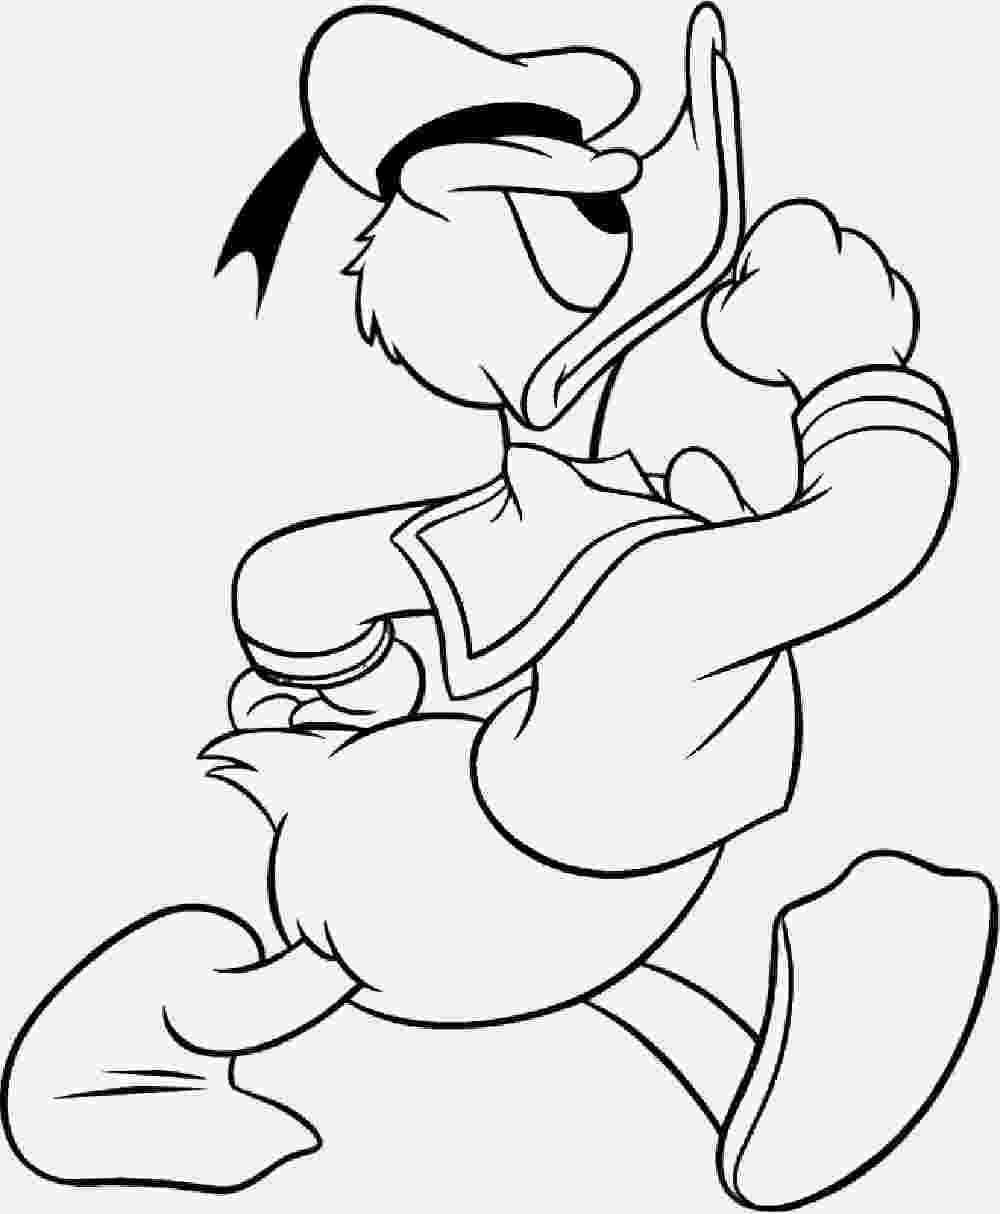 donald duck images for colouring donald duck coloring pages disney39s world of wonders colouring duck for images donald 